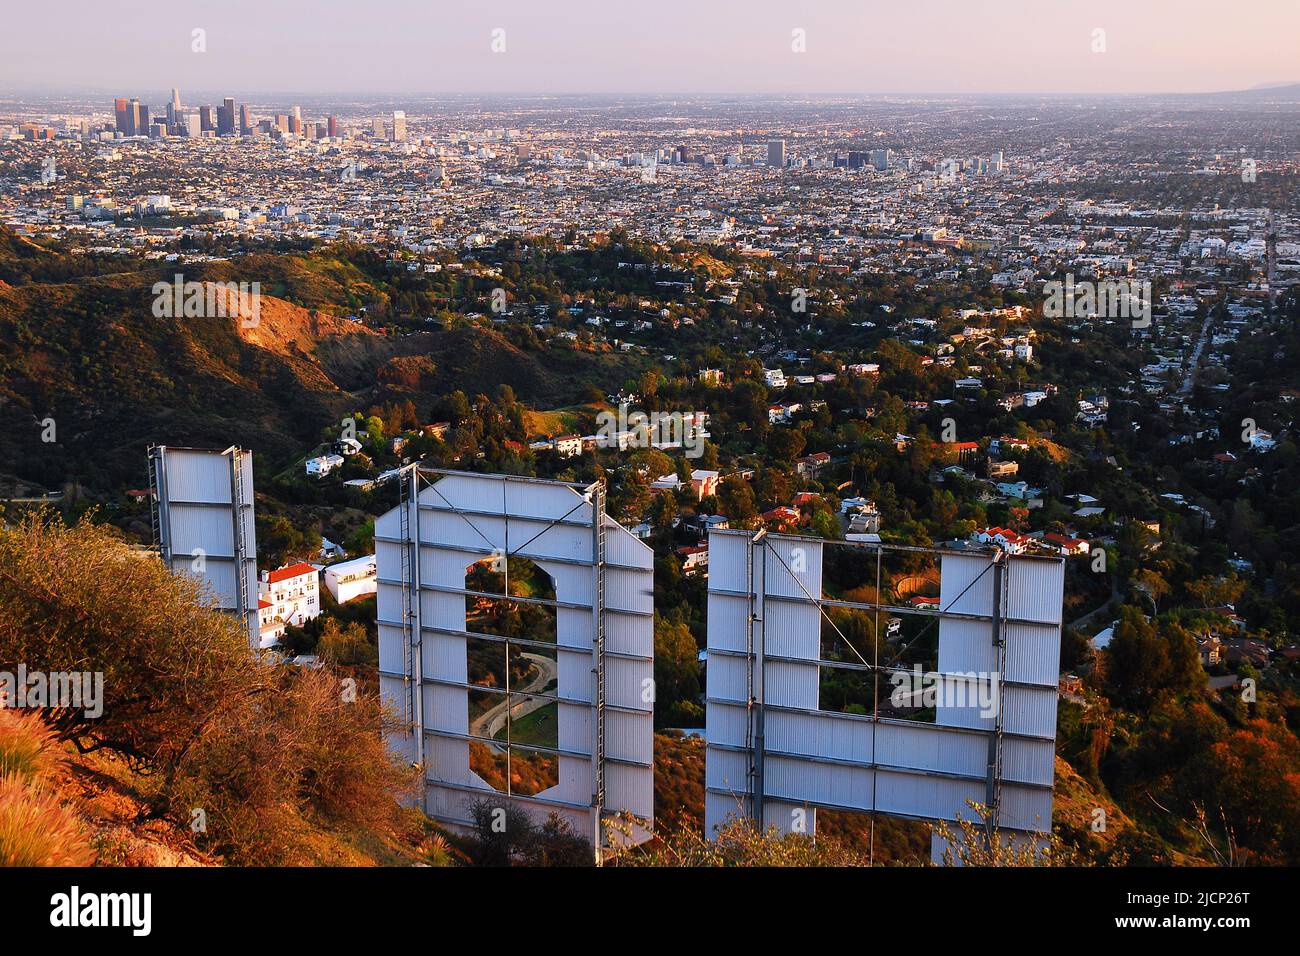 The Hollywood sign, a symbol of the movie, film and entertainment industry rises over the city of Los Angeles Stock Photo